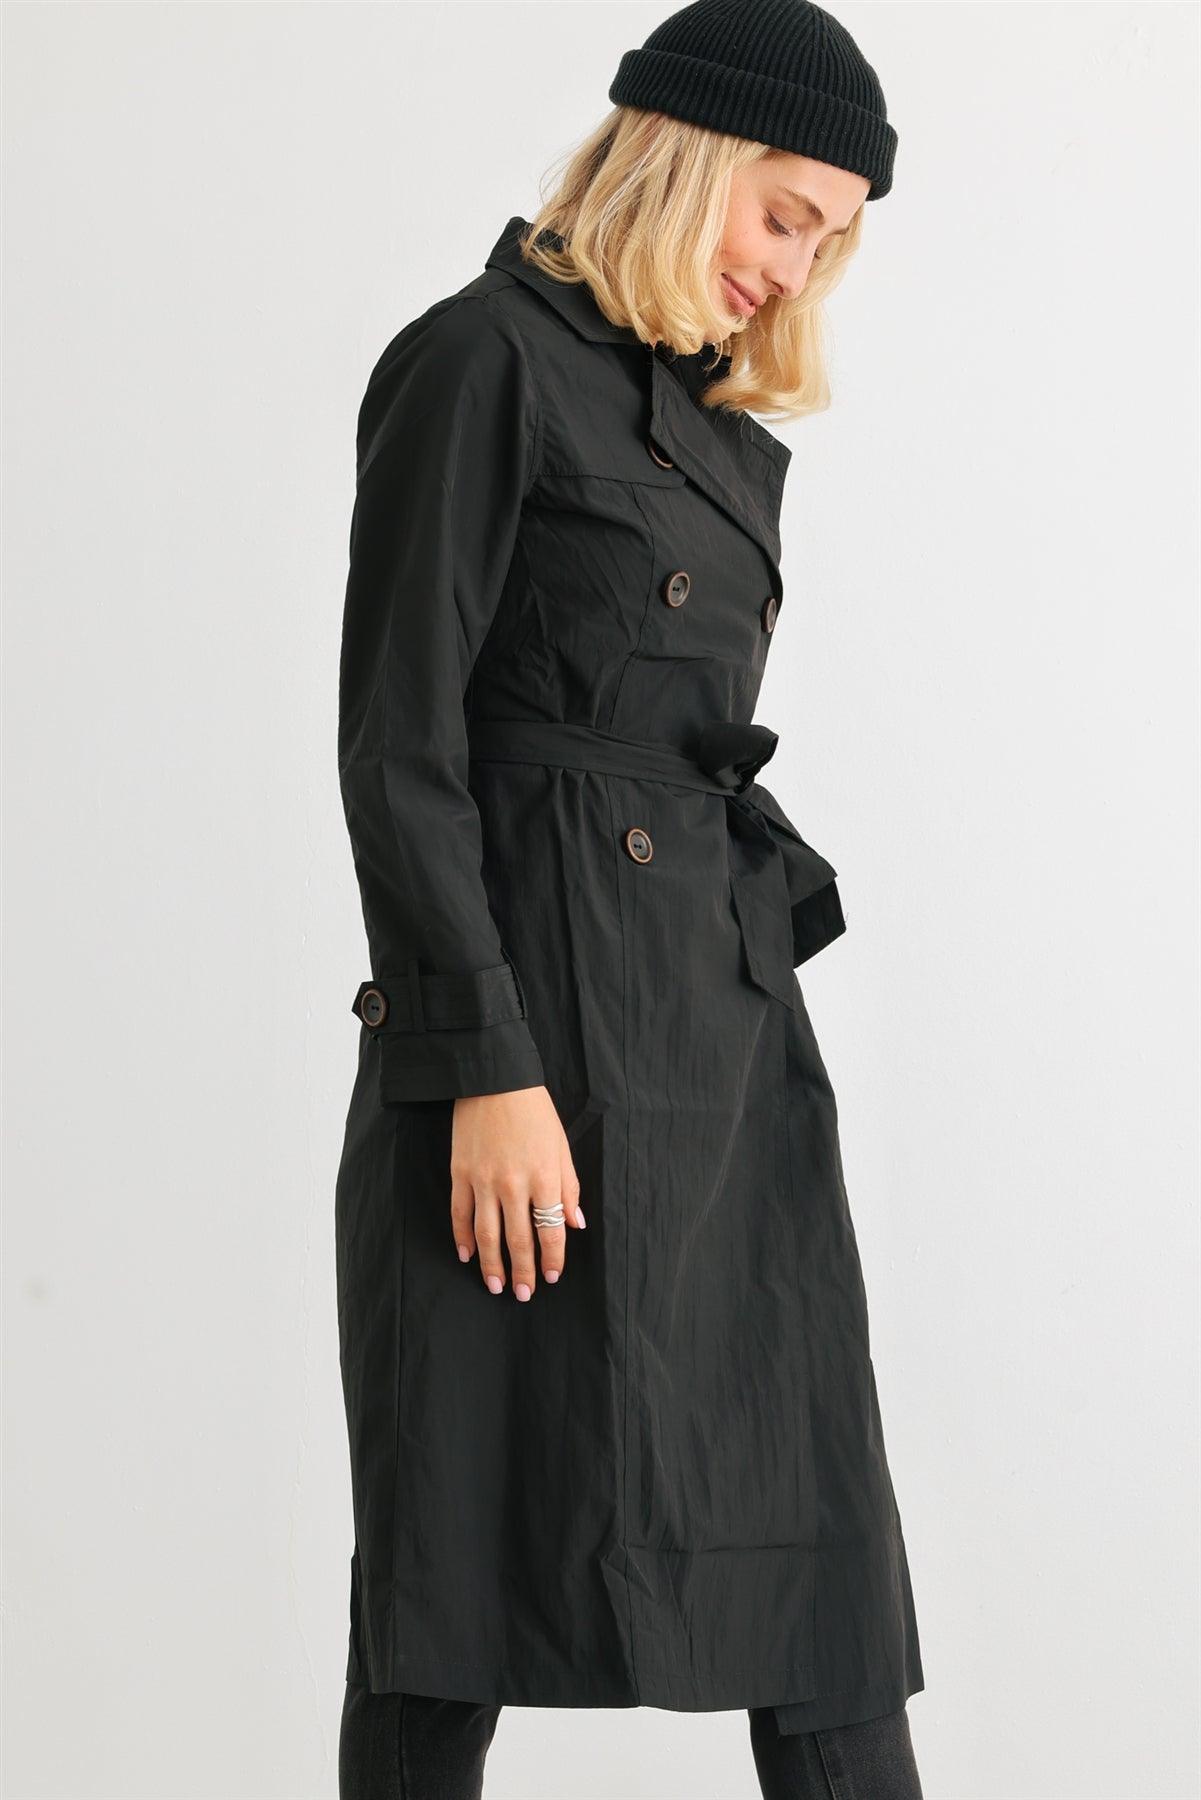 Black Double-Breasted Two Pocket Belted Collared Neck Trench Coat